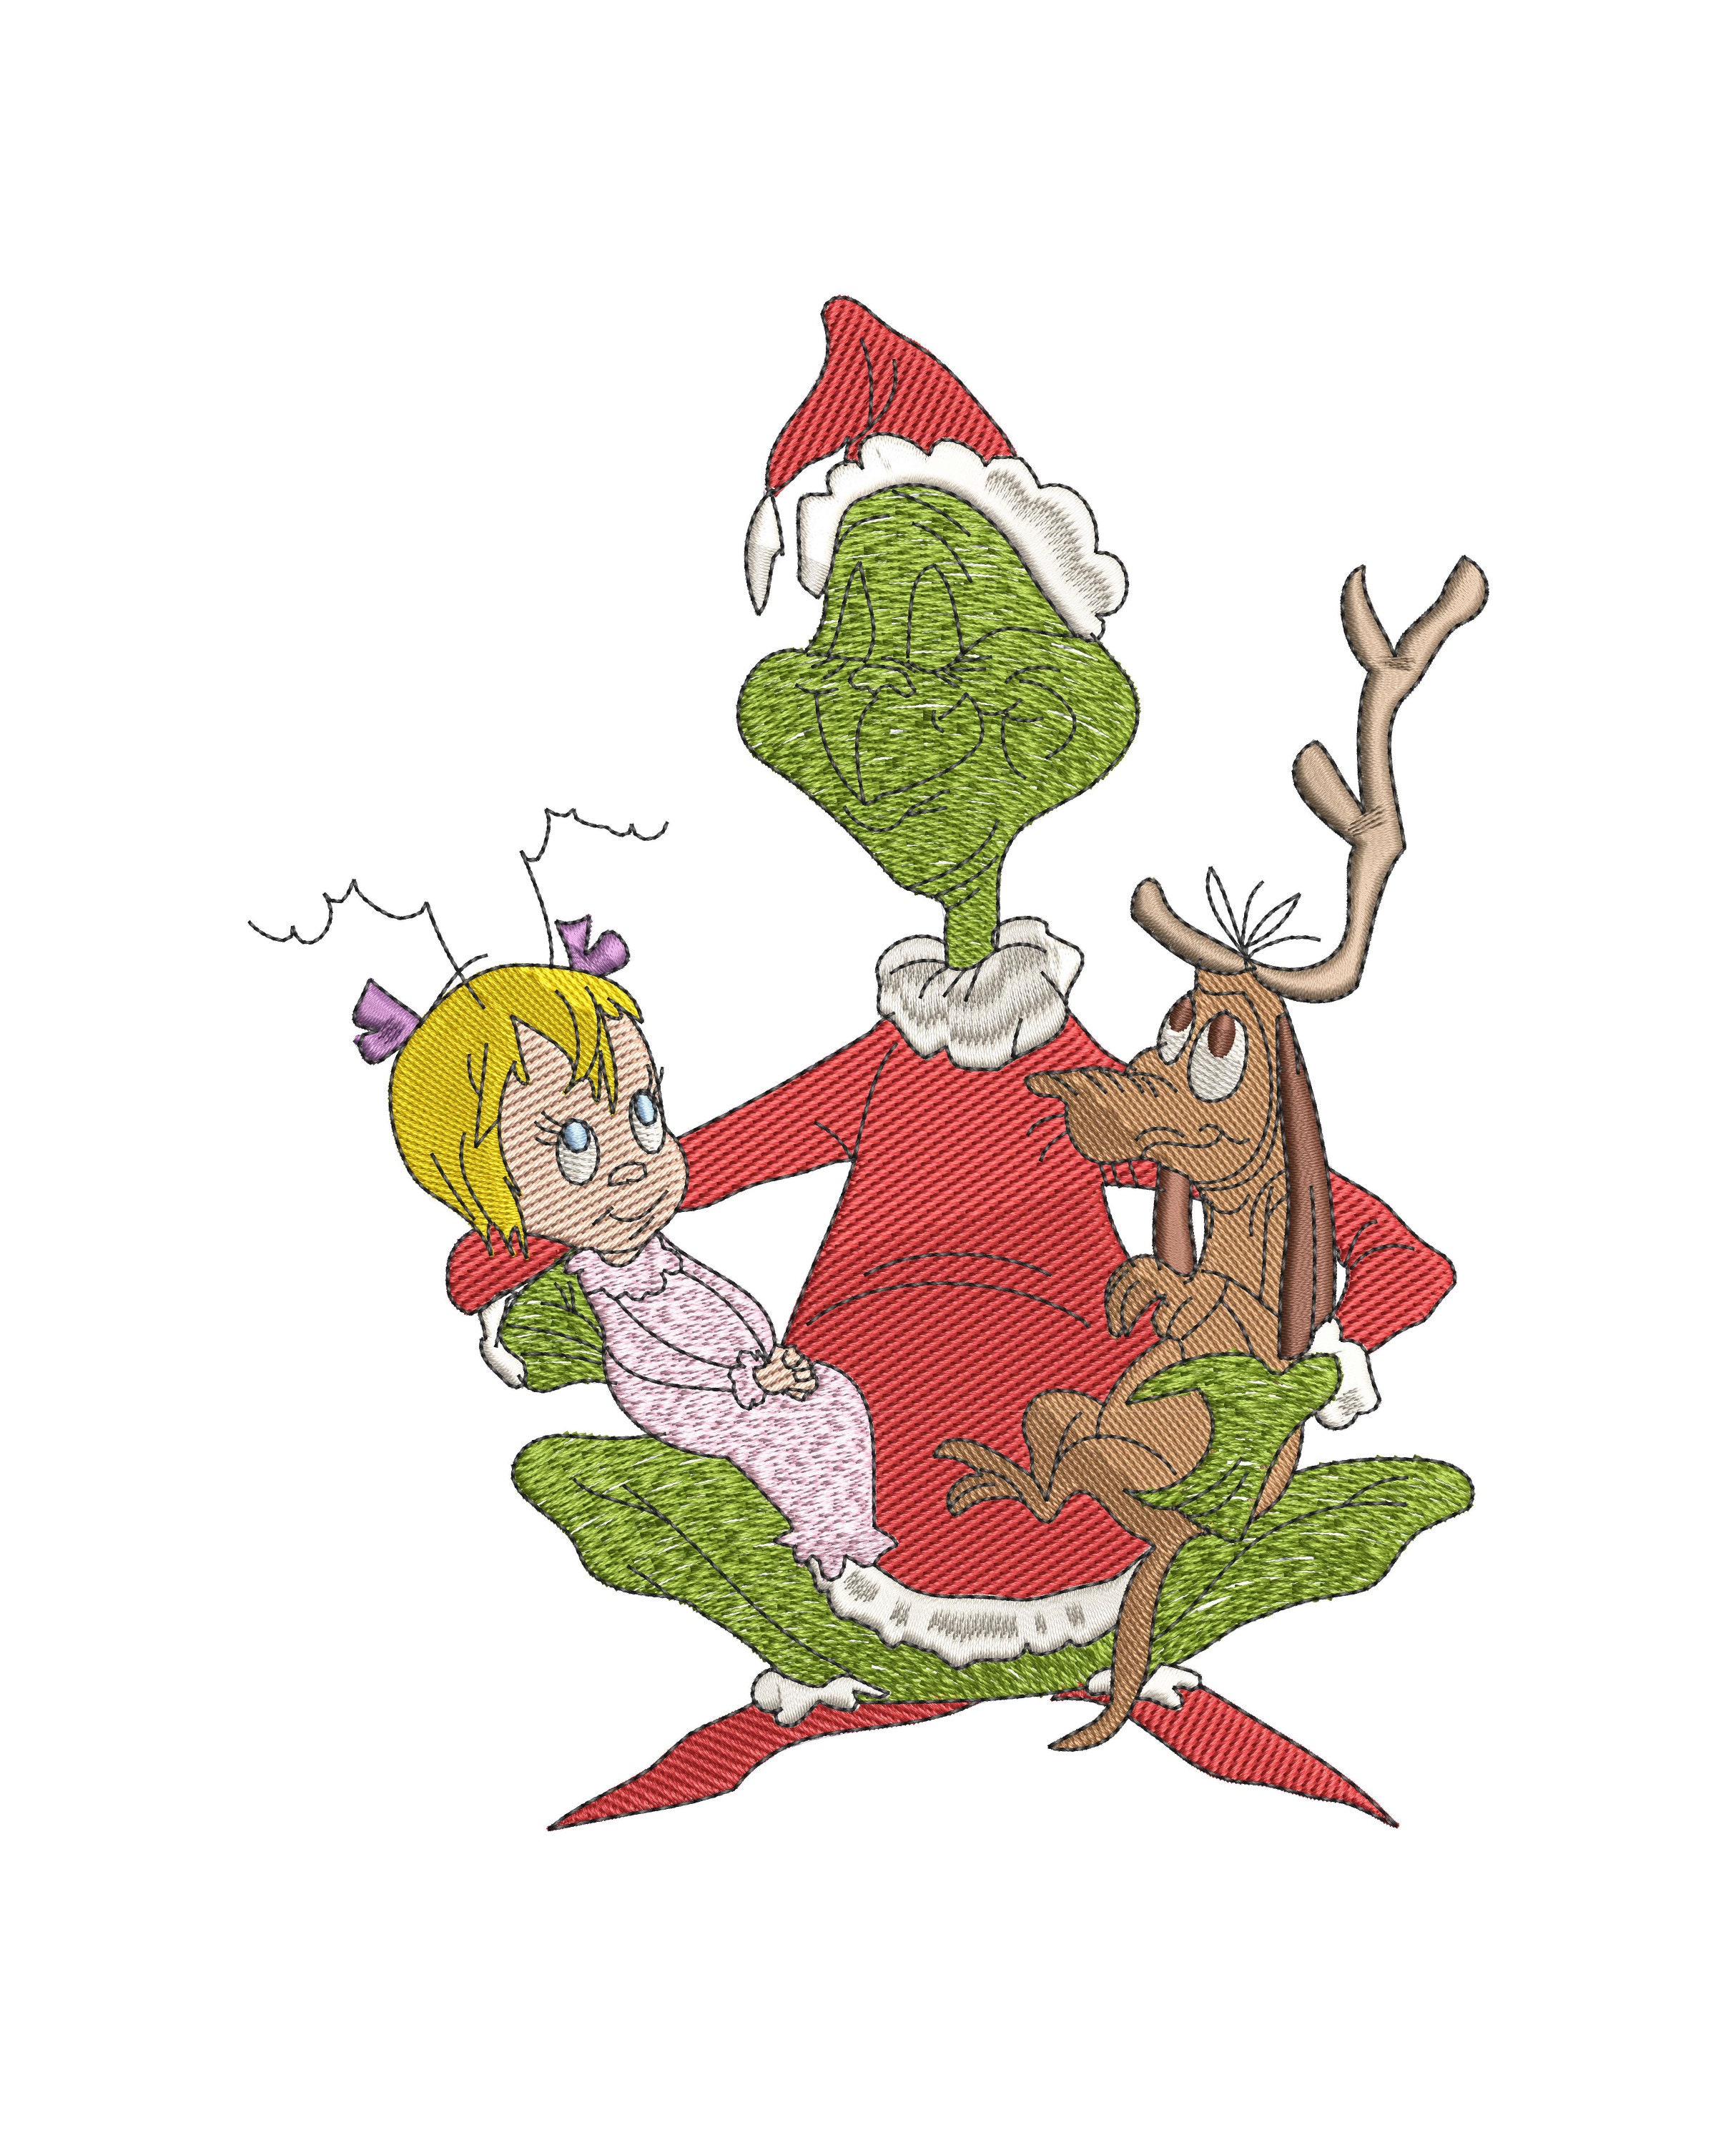 Grinch Max Cindy Lou Who 1-1/8” Fabric Needle Minders - Magnetic - Cross  Stitch, Needlework, Quilting, Embroidery, Sewing - Nanny Minder WIP